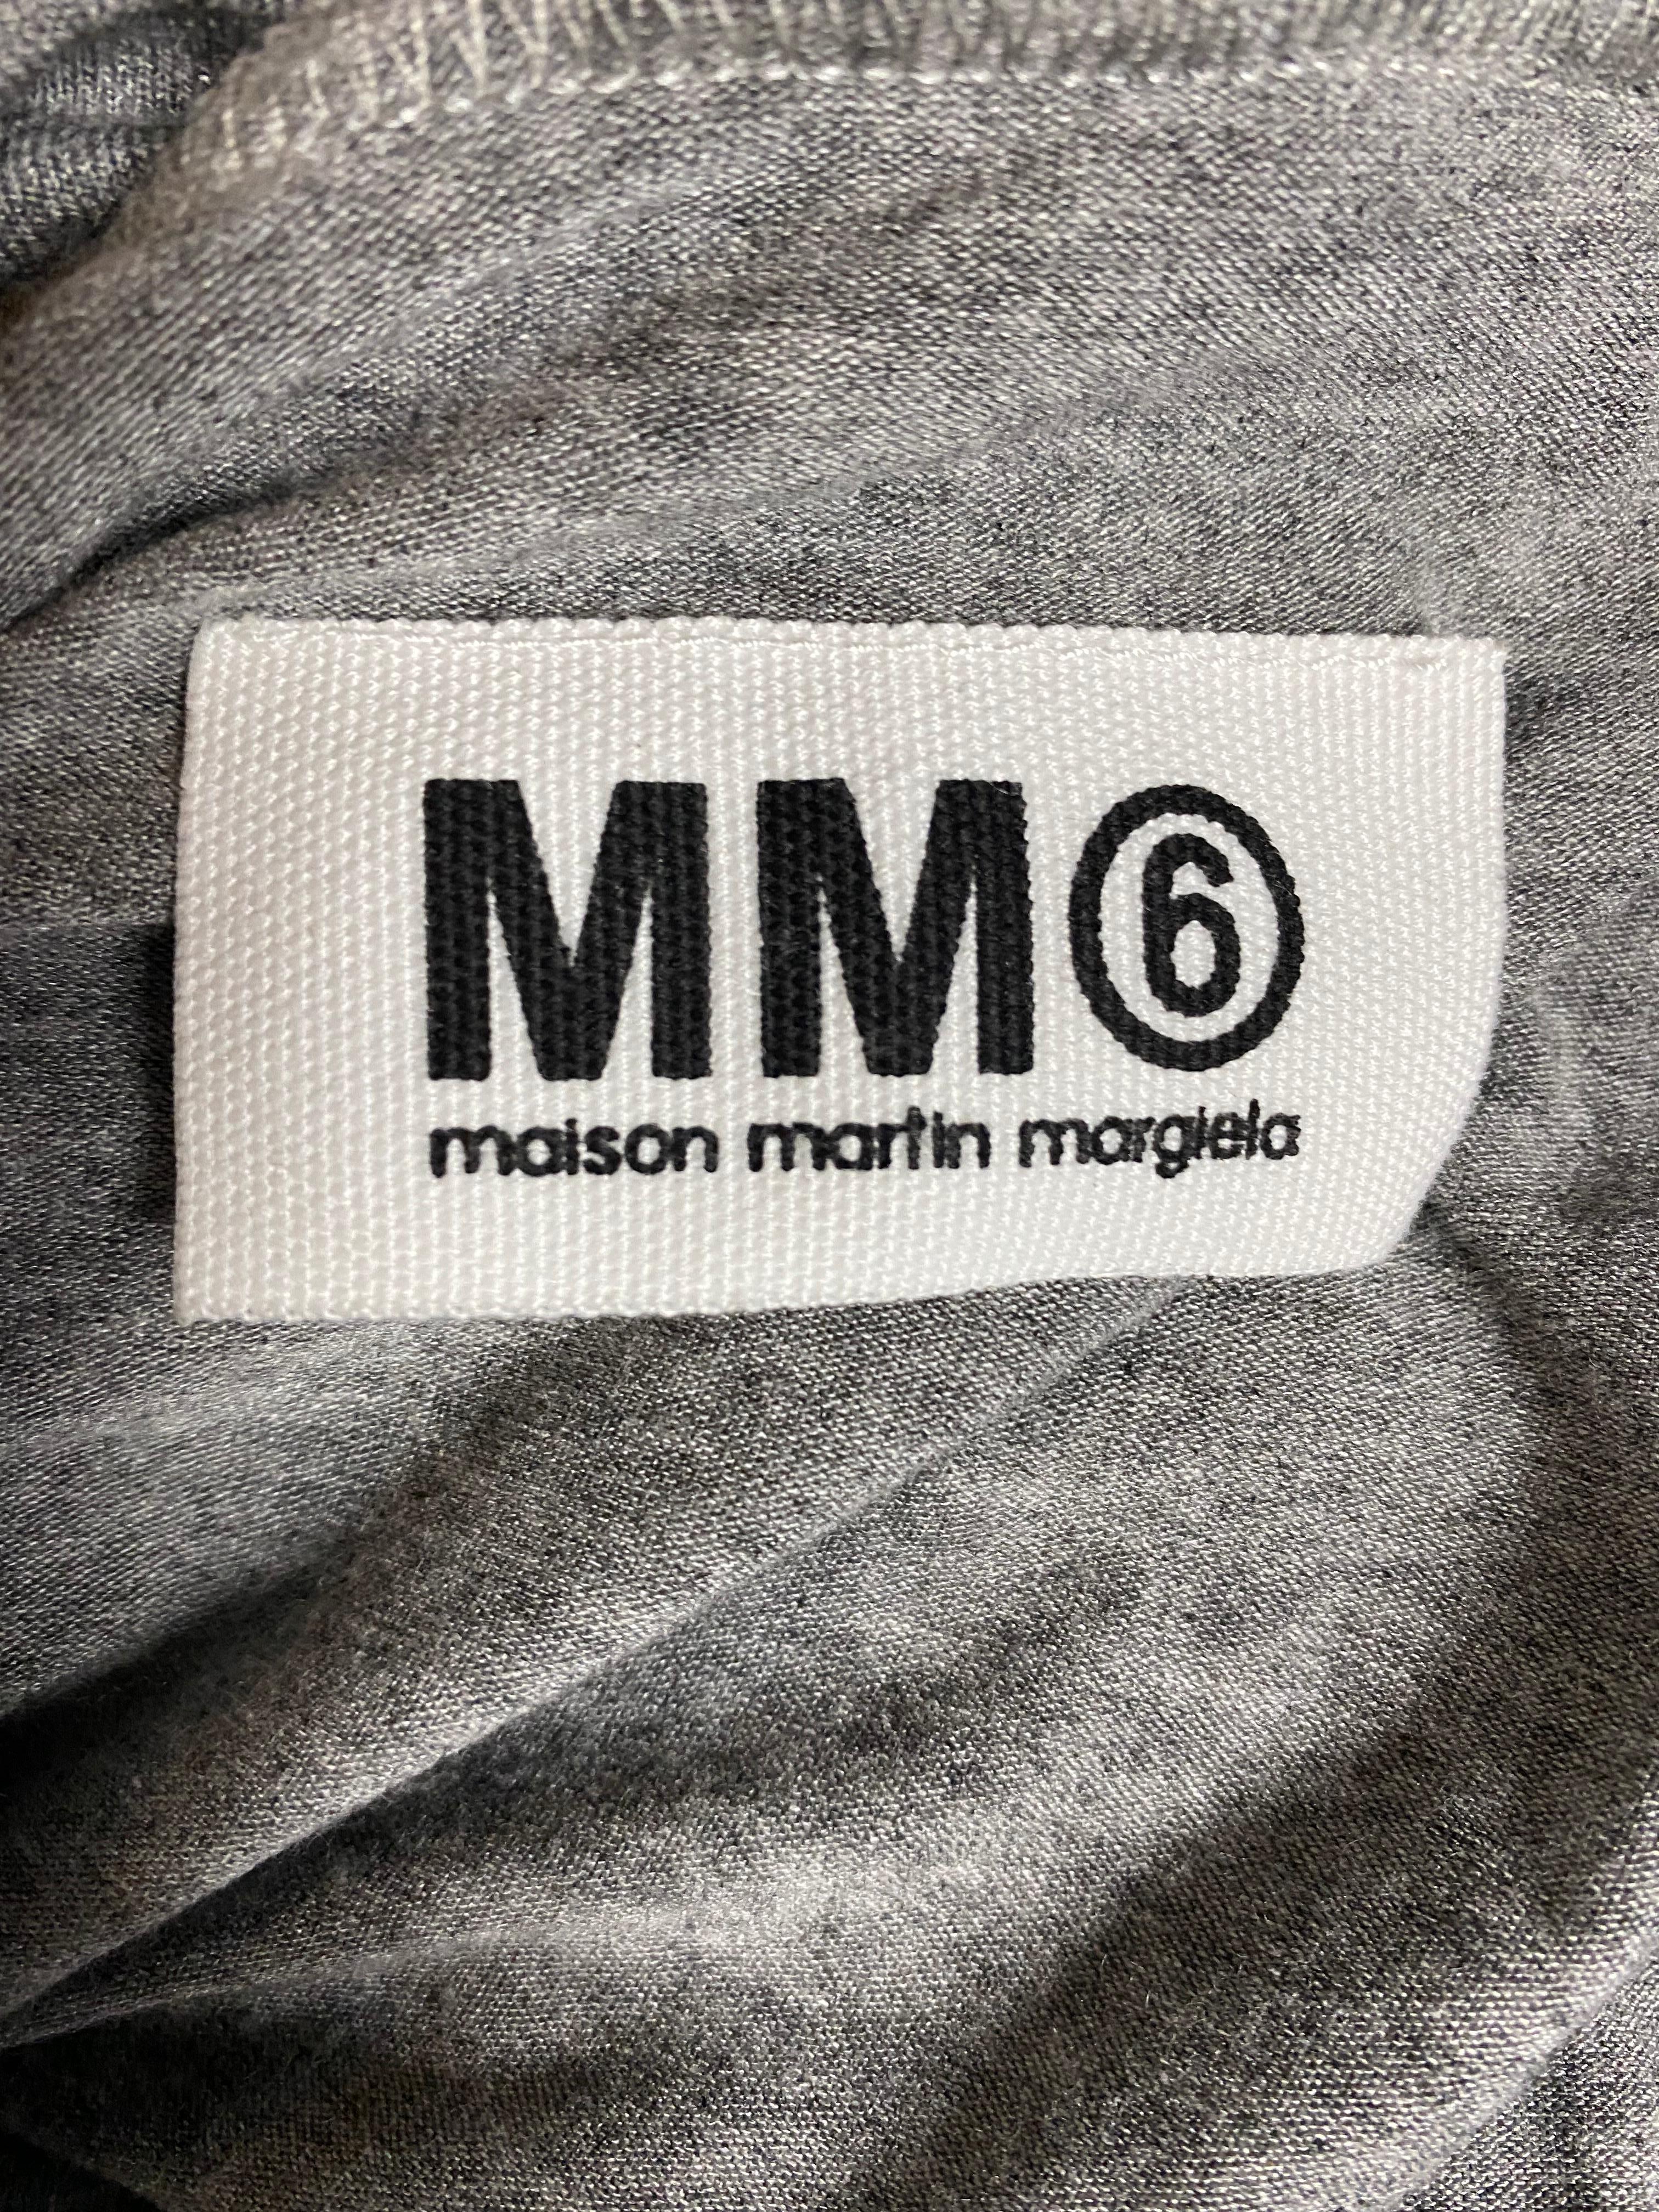 MM6 Maison Martin Margiela Grey Mini Dress, Size Small In Excellent Condition For Sale In Beverly Hills, CA